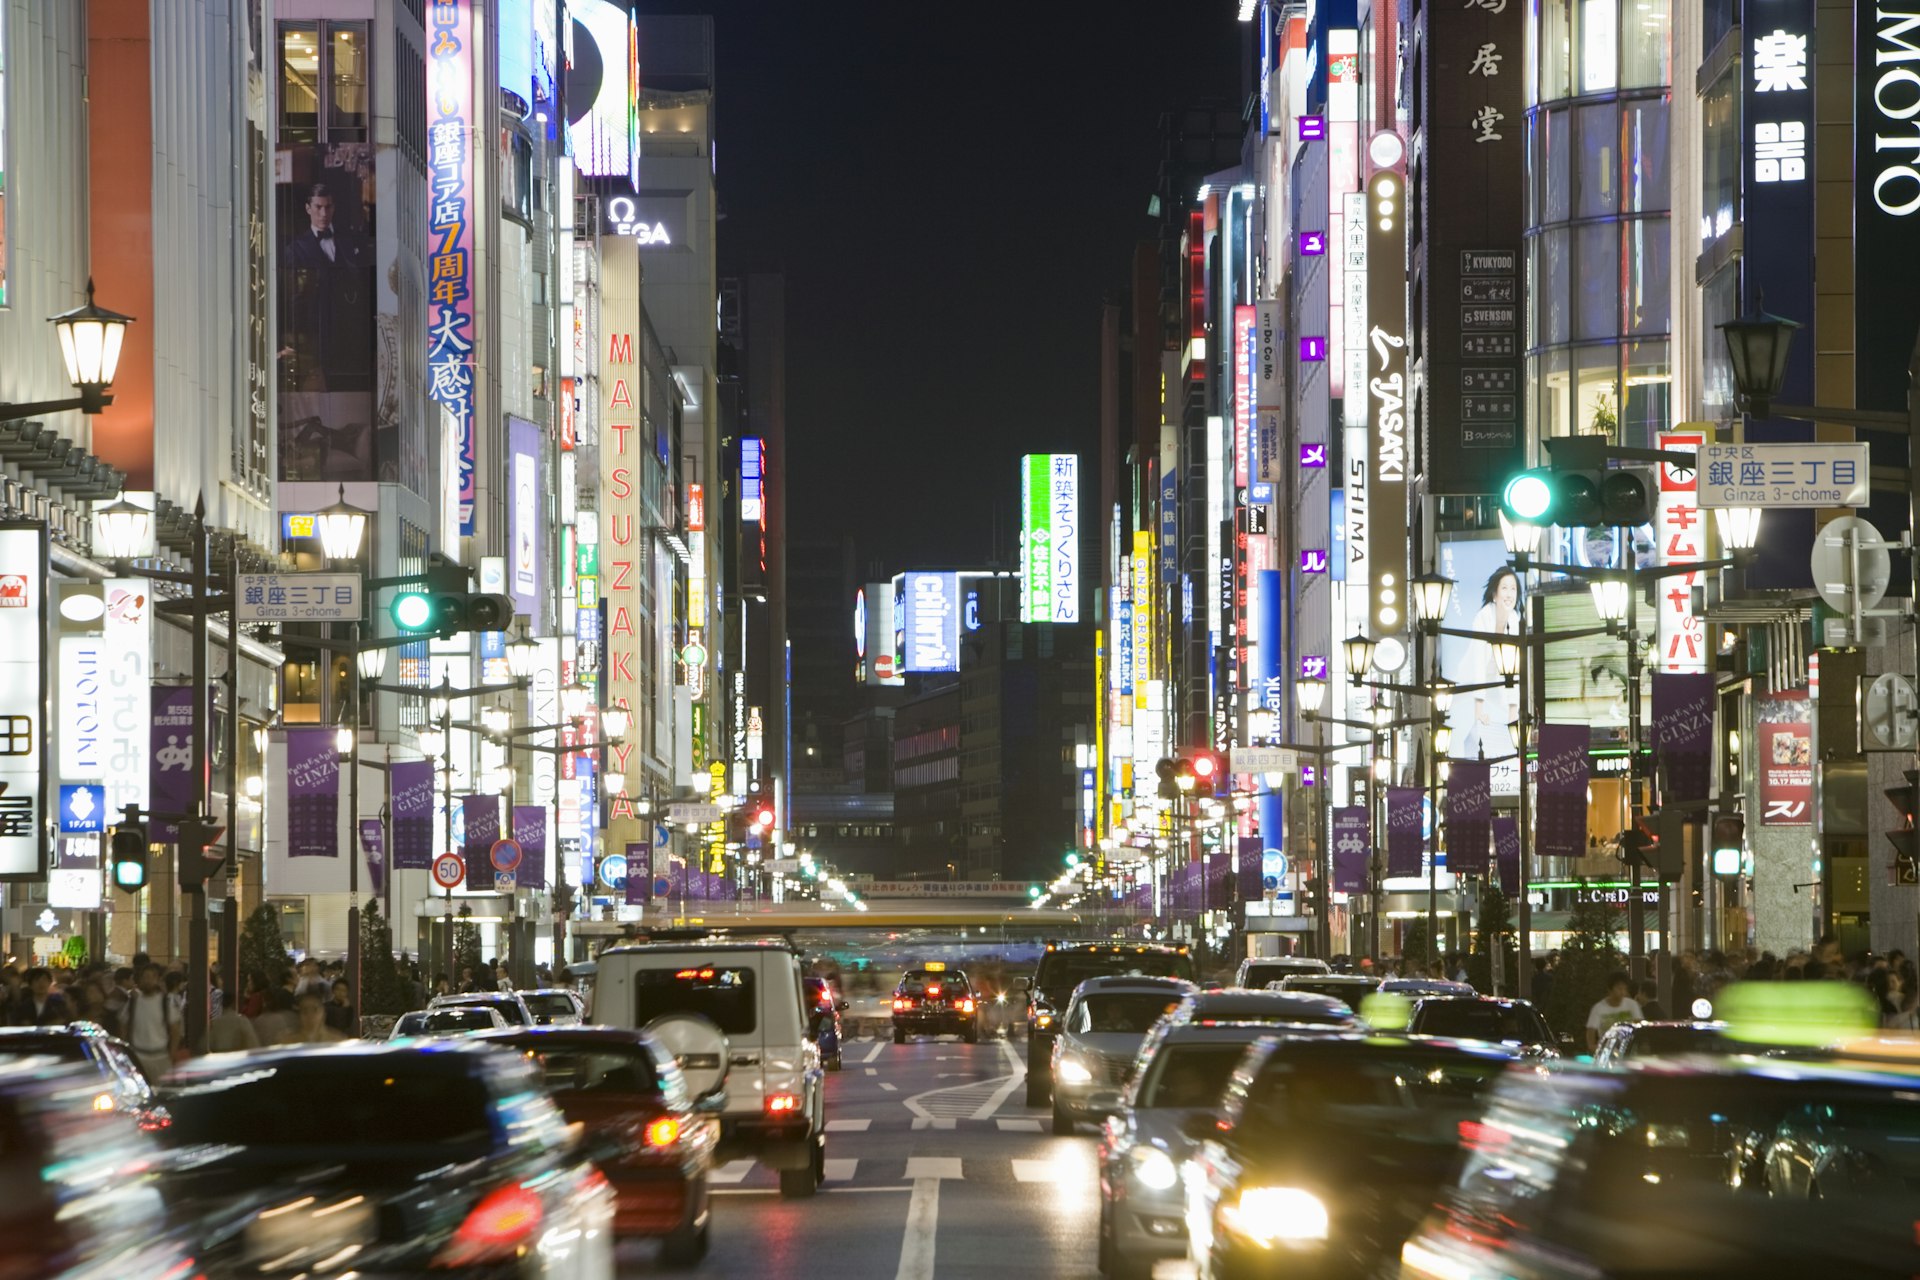 Chuo Street in Tokyo at night, very busy with traffic in motion, shops and signs are lit up